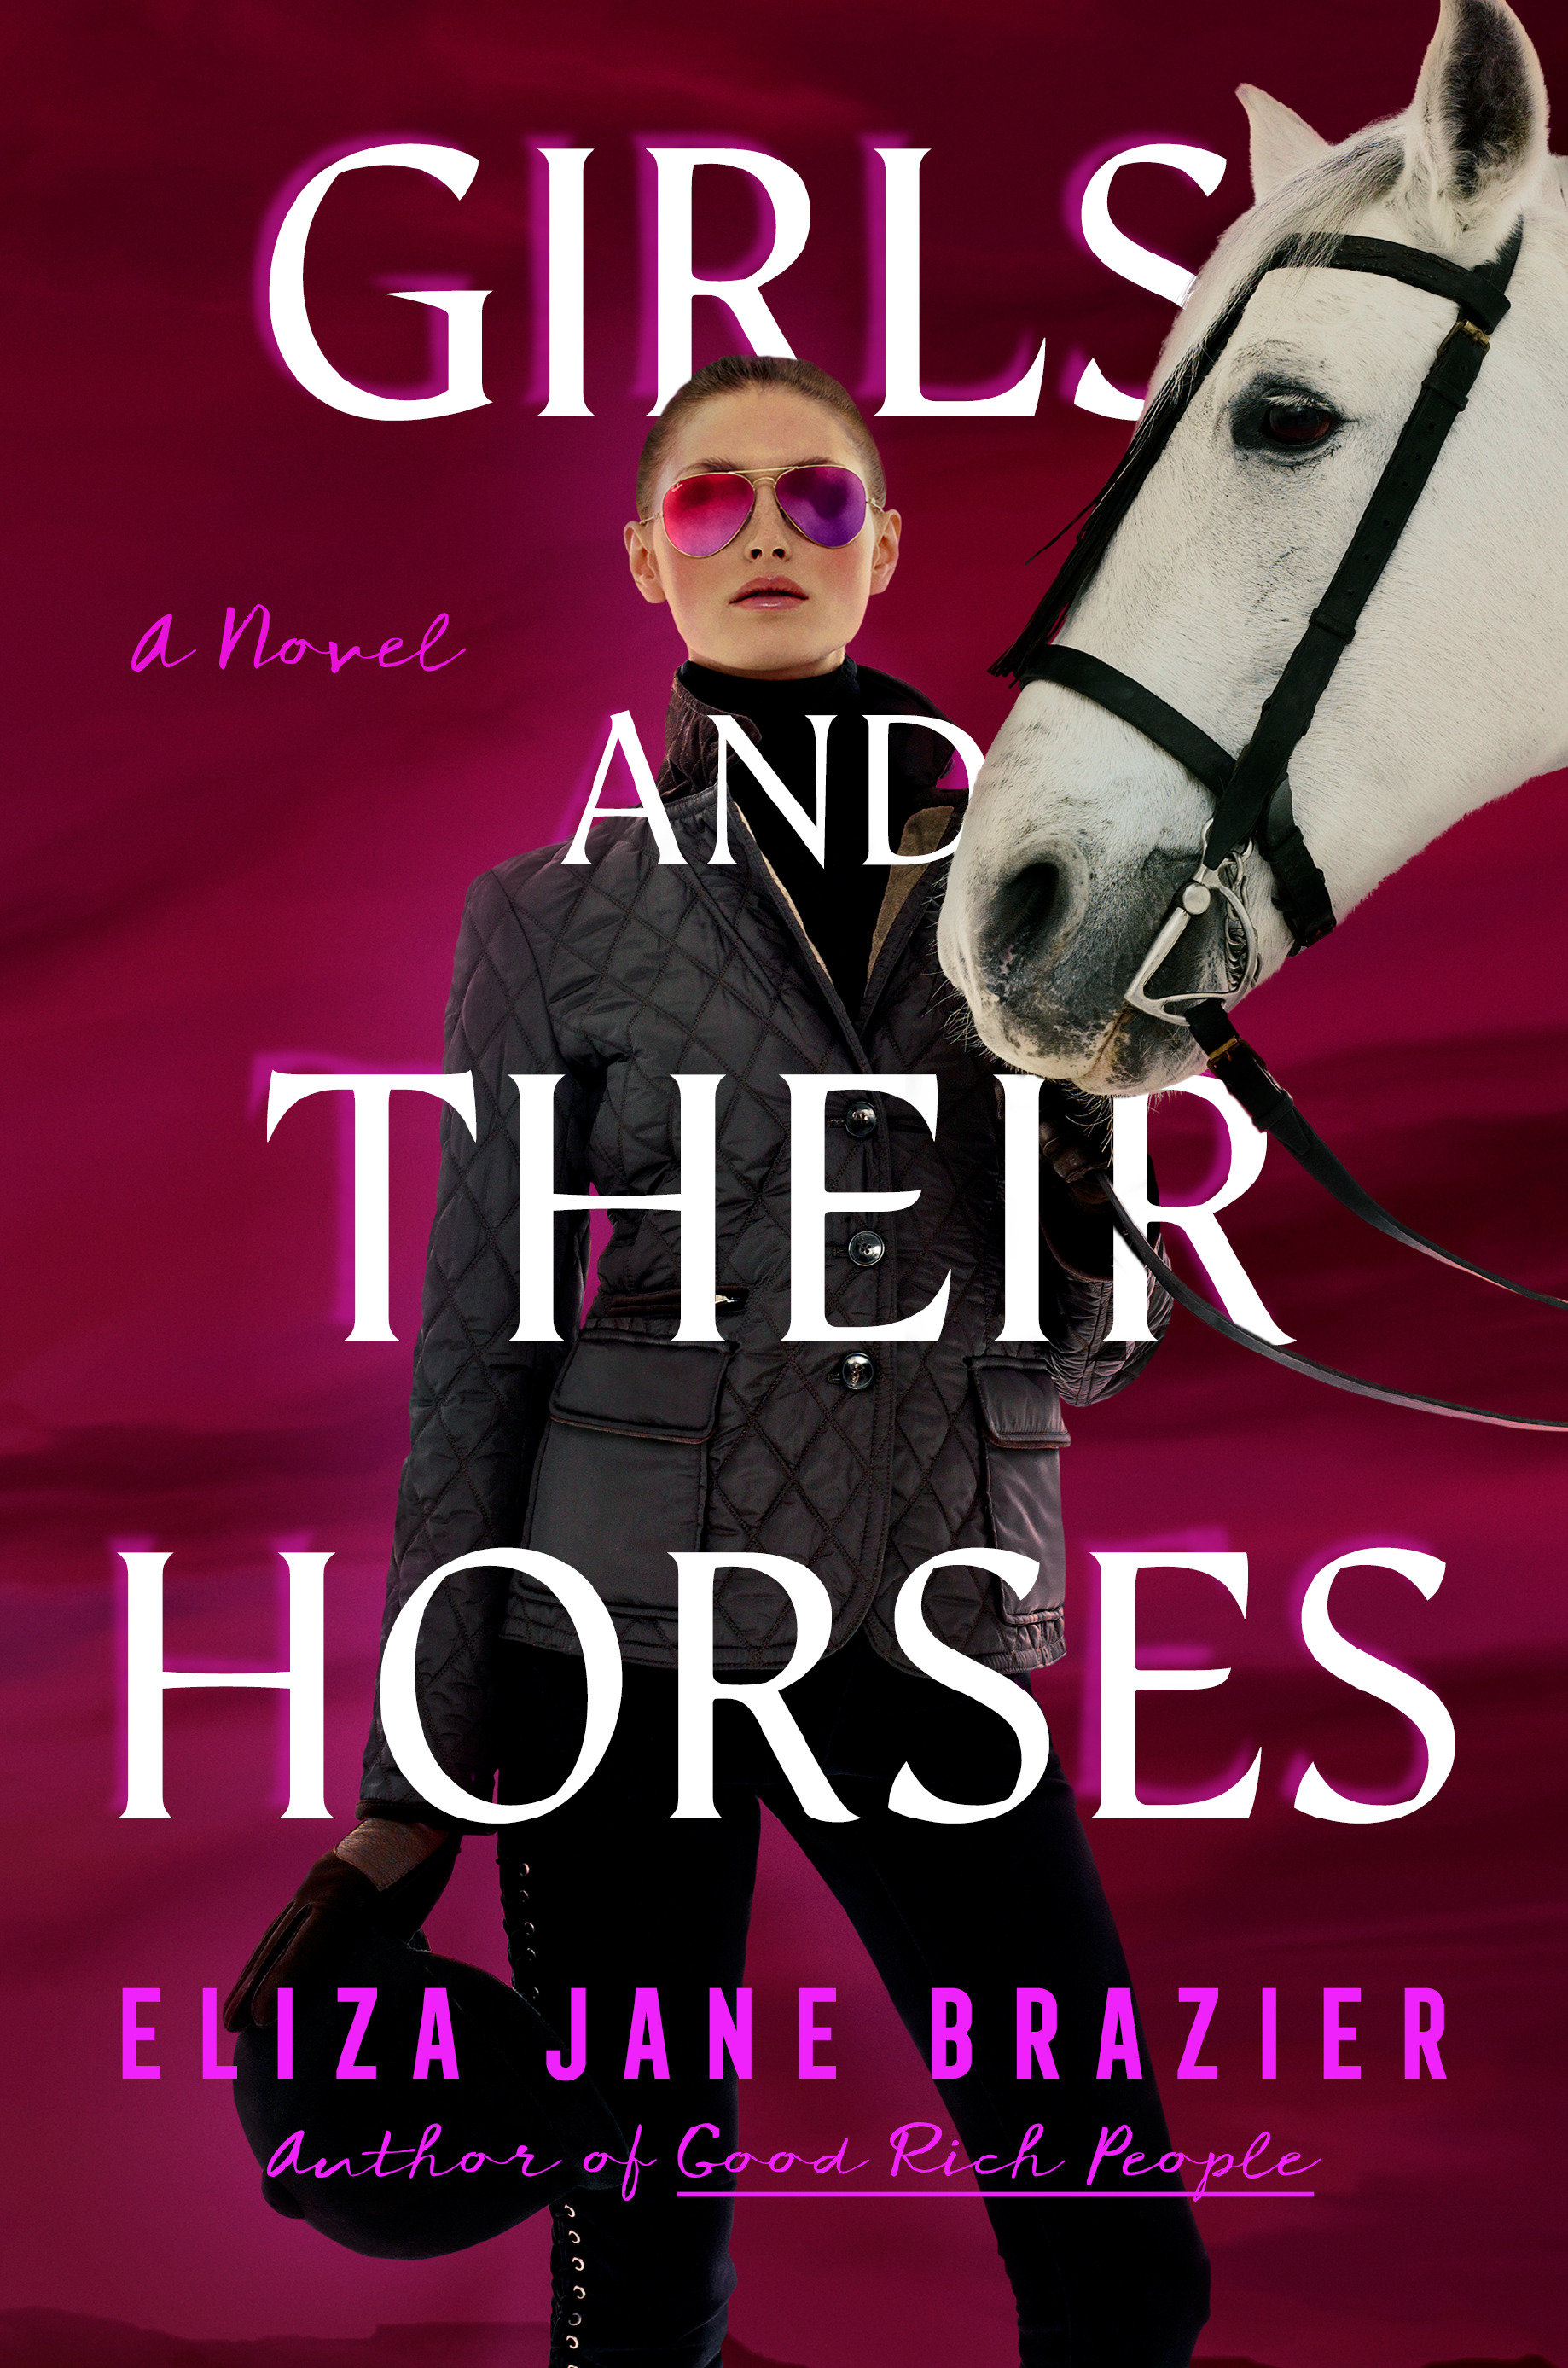 Girls And Their Horses (Hardcover Book)